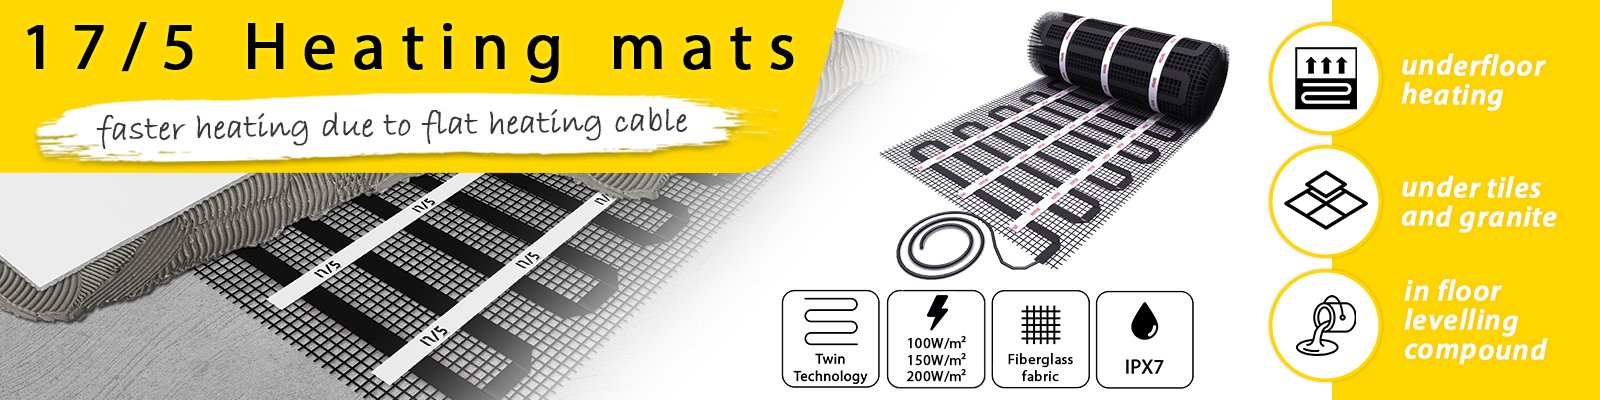 High-quality heating mat for tiles - flat heating cable for rapid heating